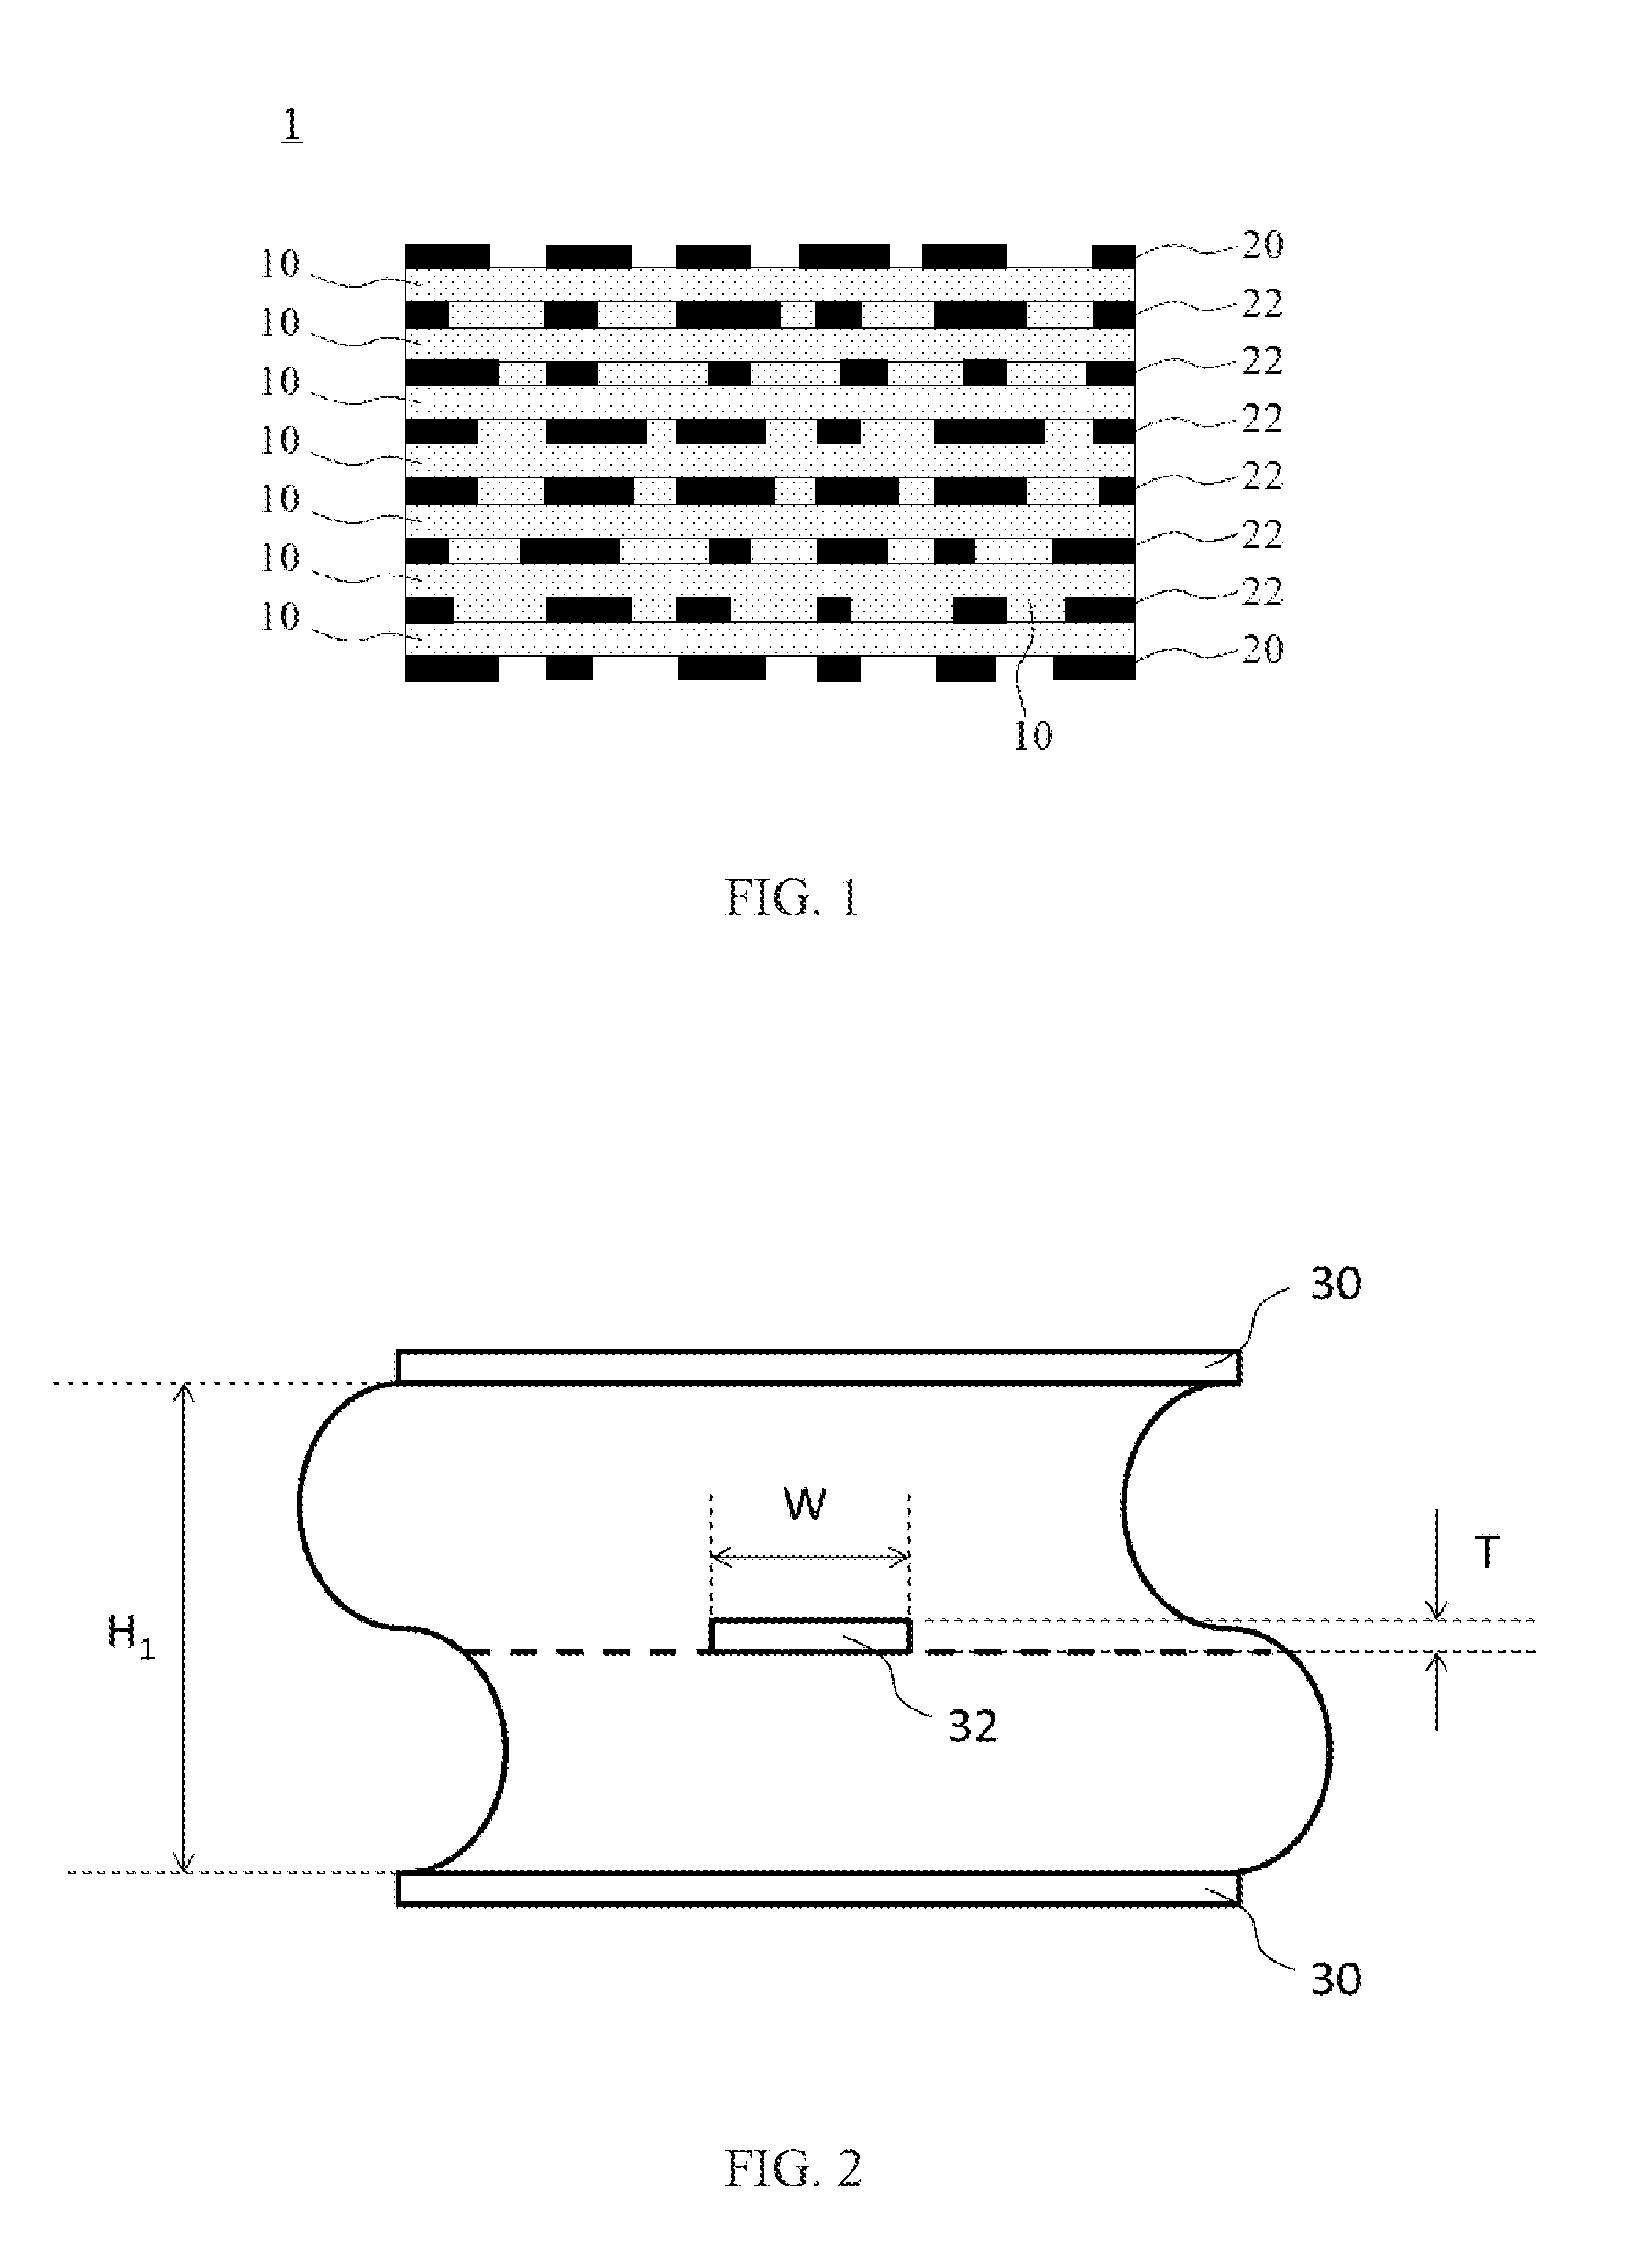 Multi-layer printed circuit boards suitable for layer reduction design